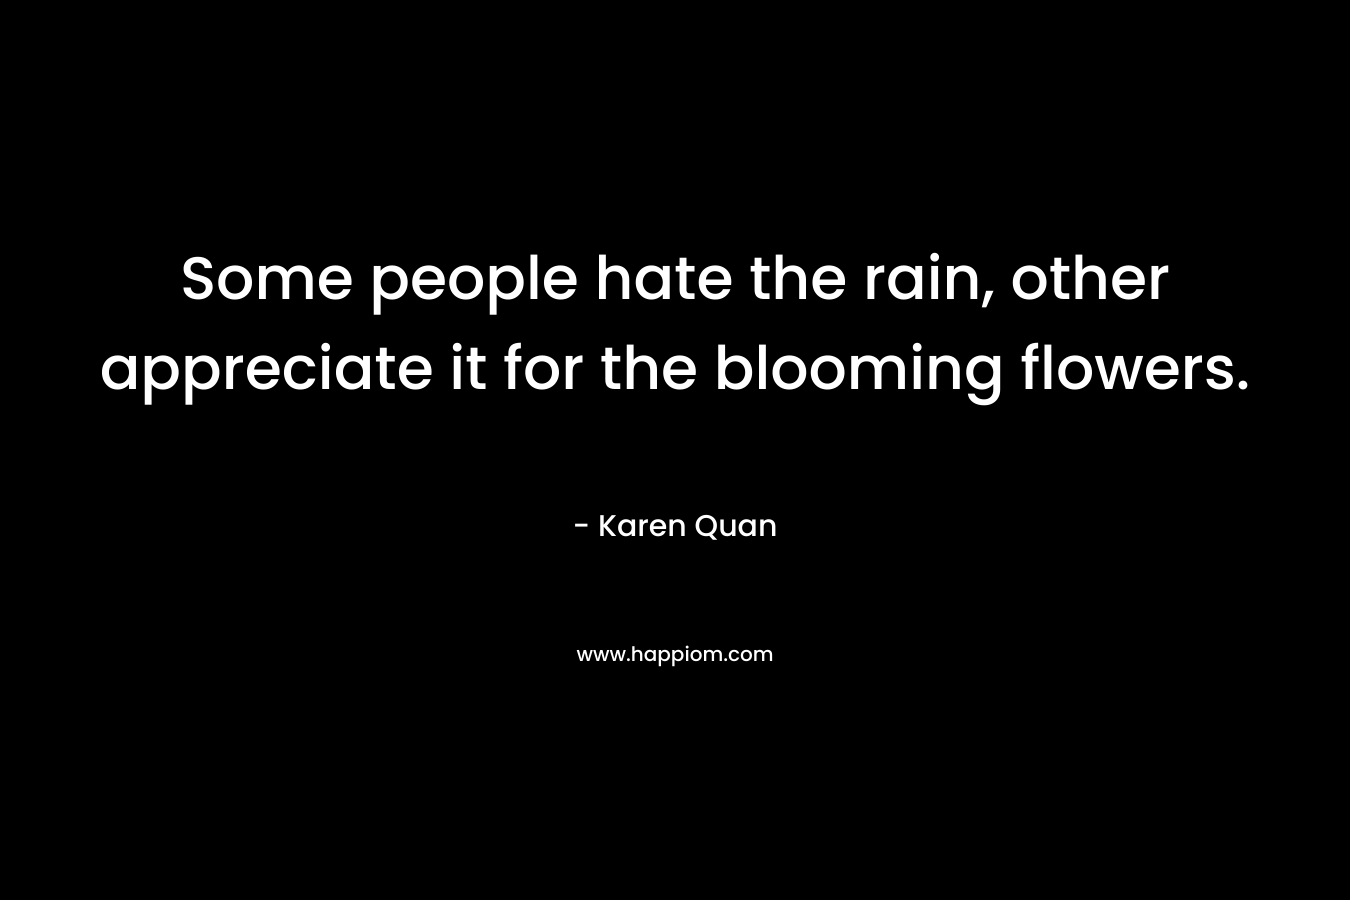 Some people hate the rain, other appreciate it for the blooming flowers. – Karen Quan